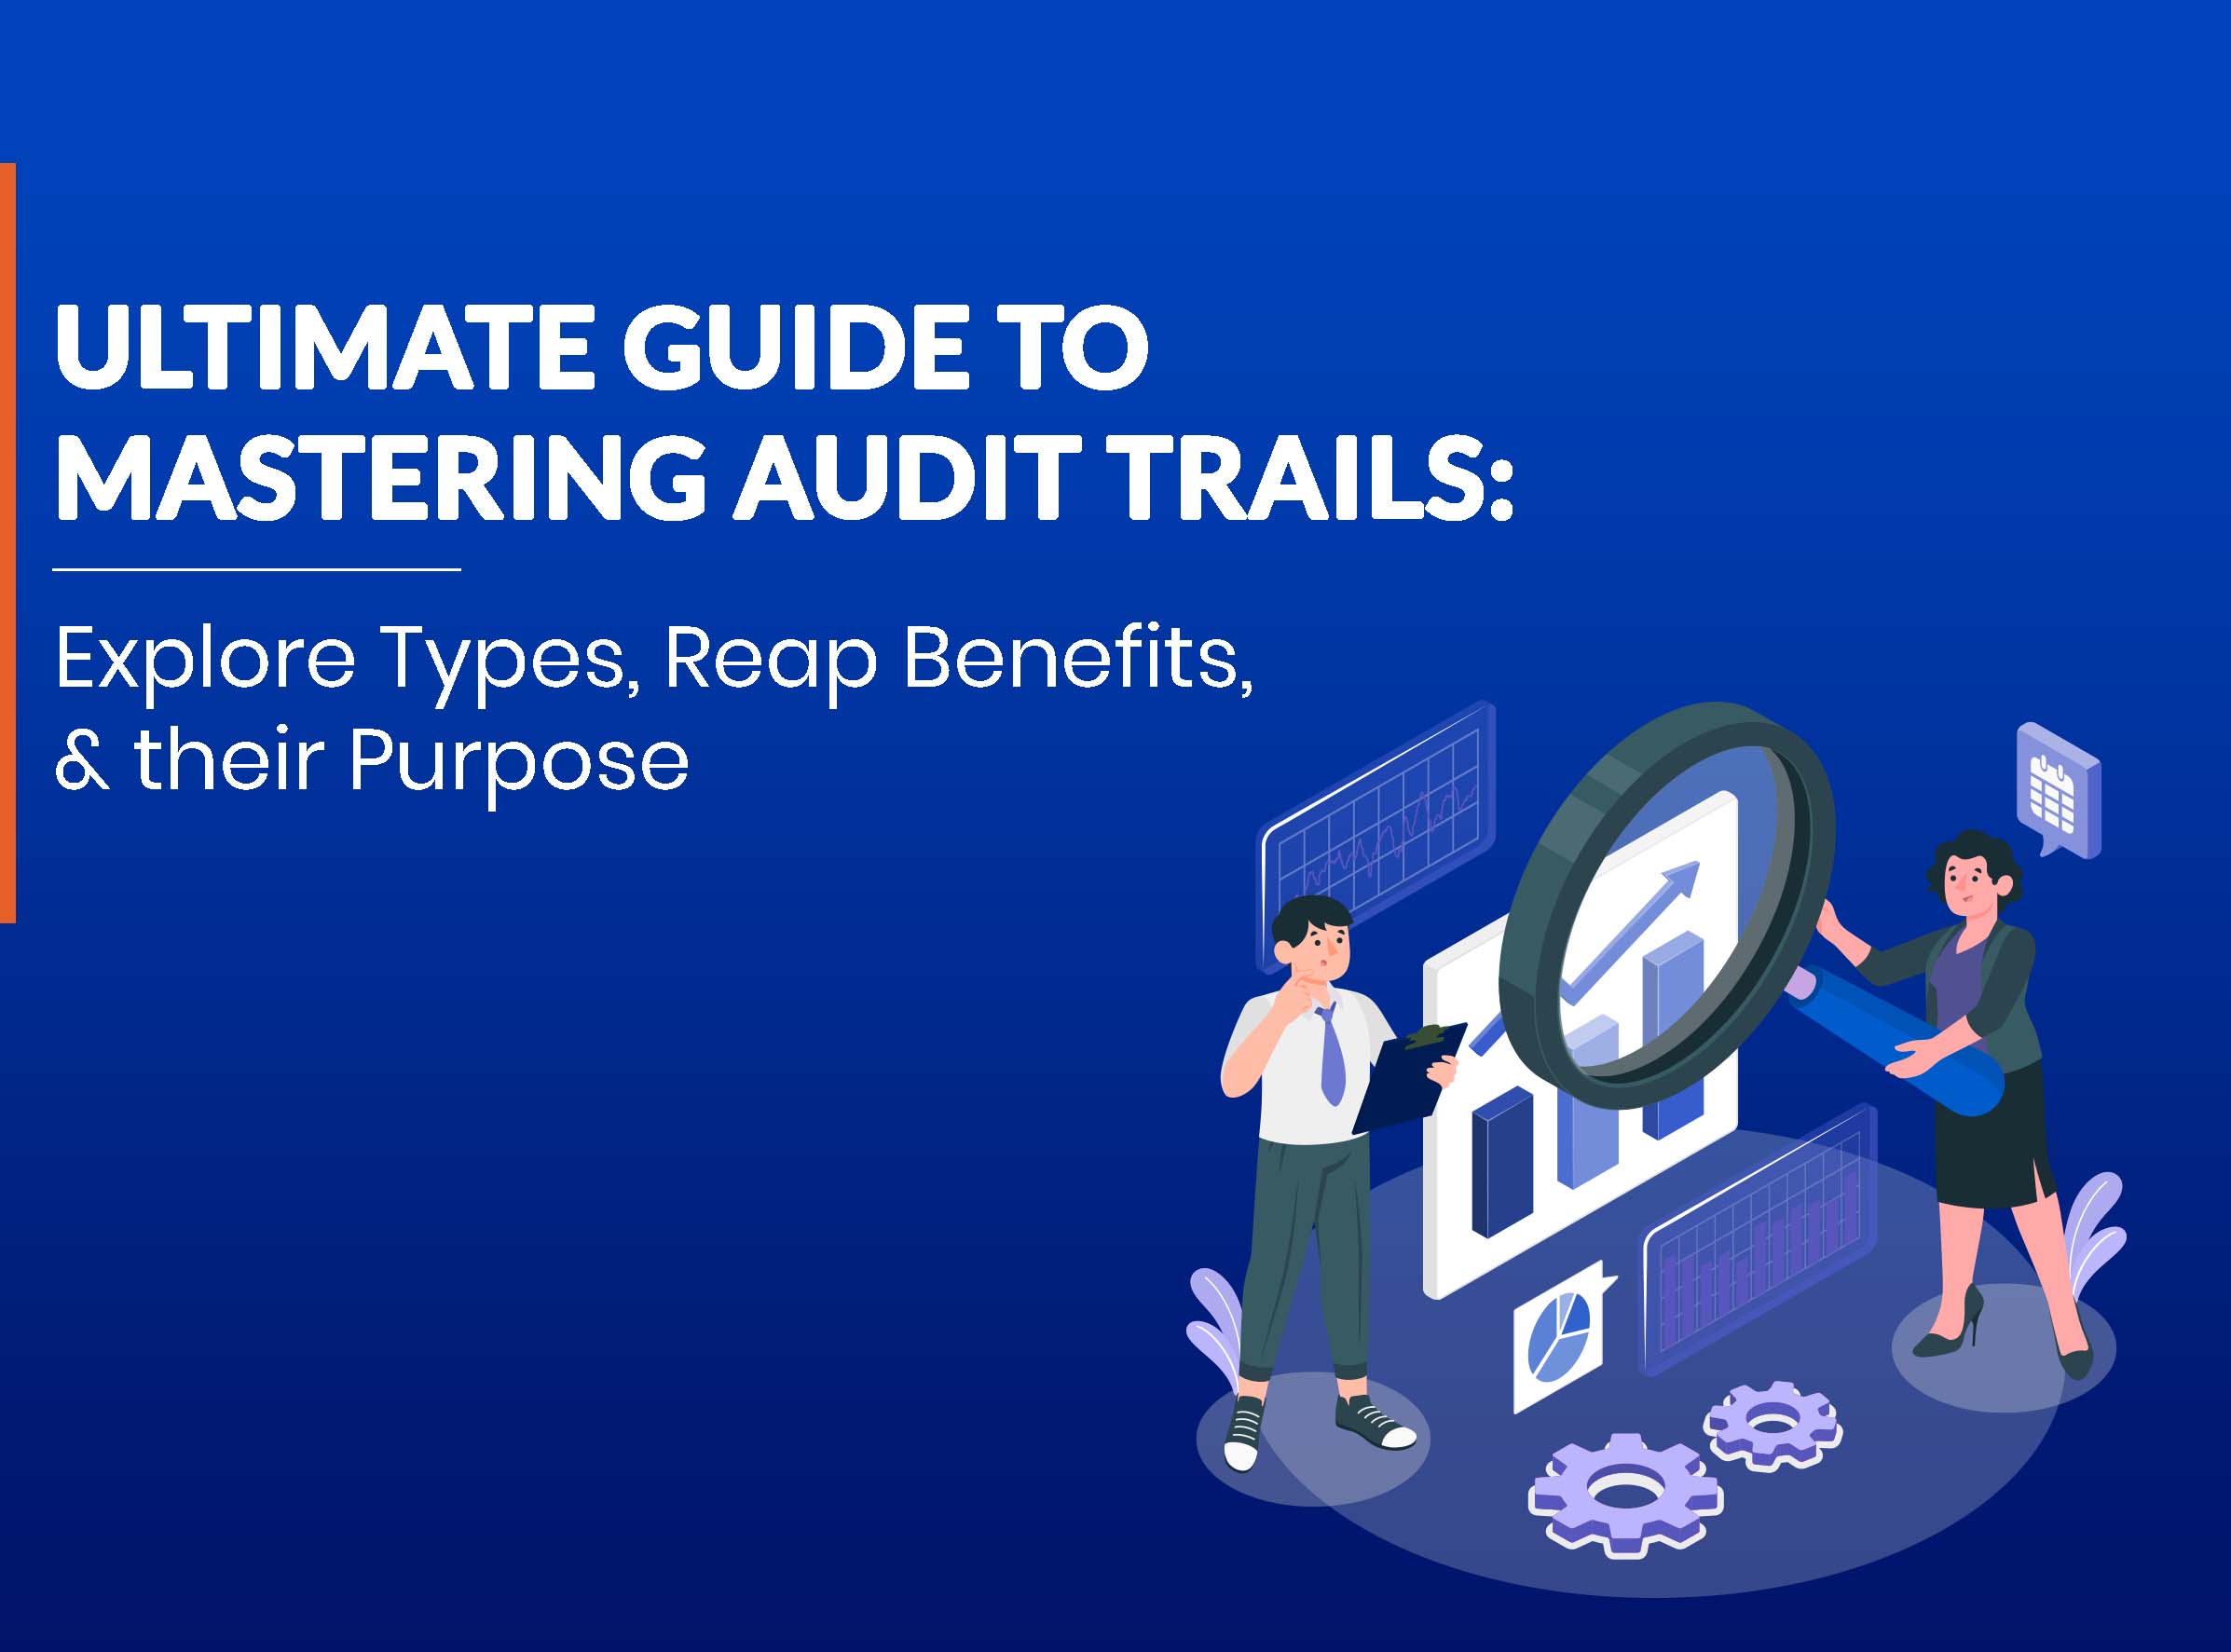 Ultimate Guide to Mastering Audit Trails: Explore Types, Reap Benefits, and Their Purpose